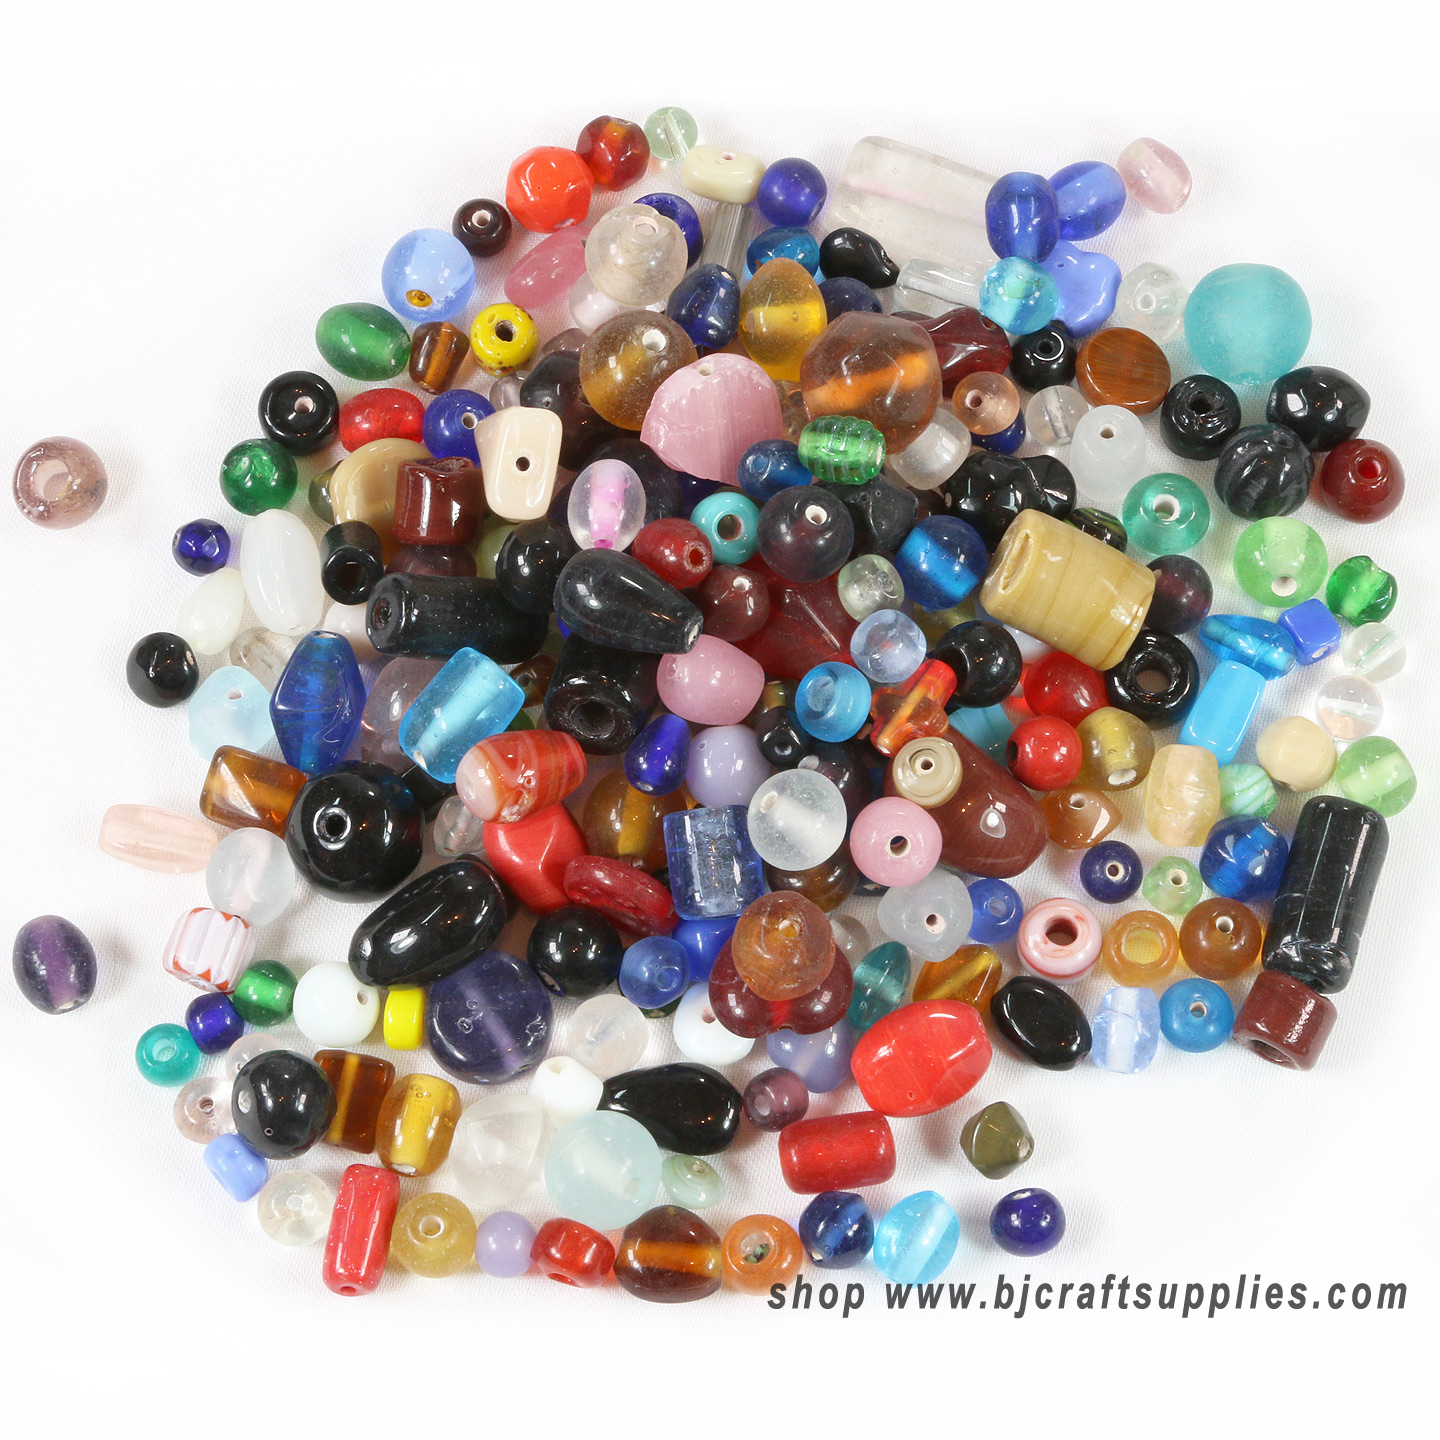 Colored Glass Beads - Glass Bead Assortment